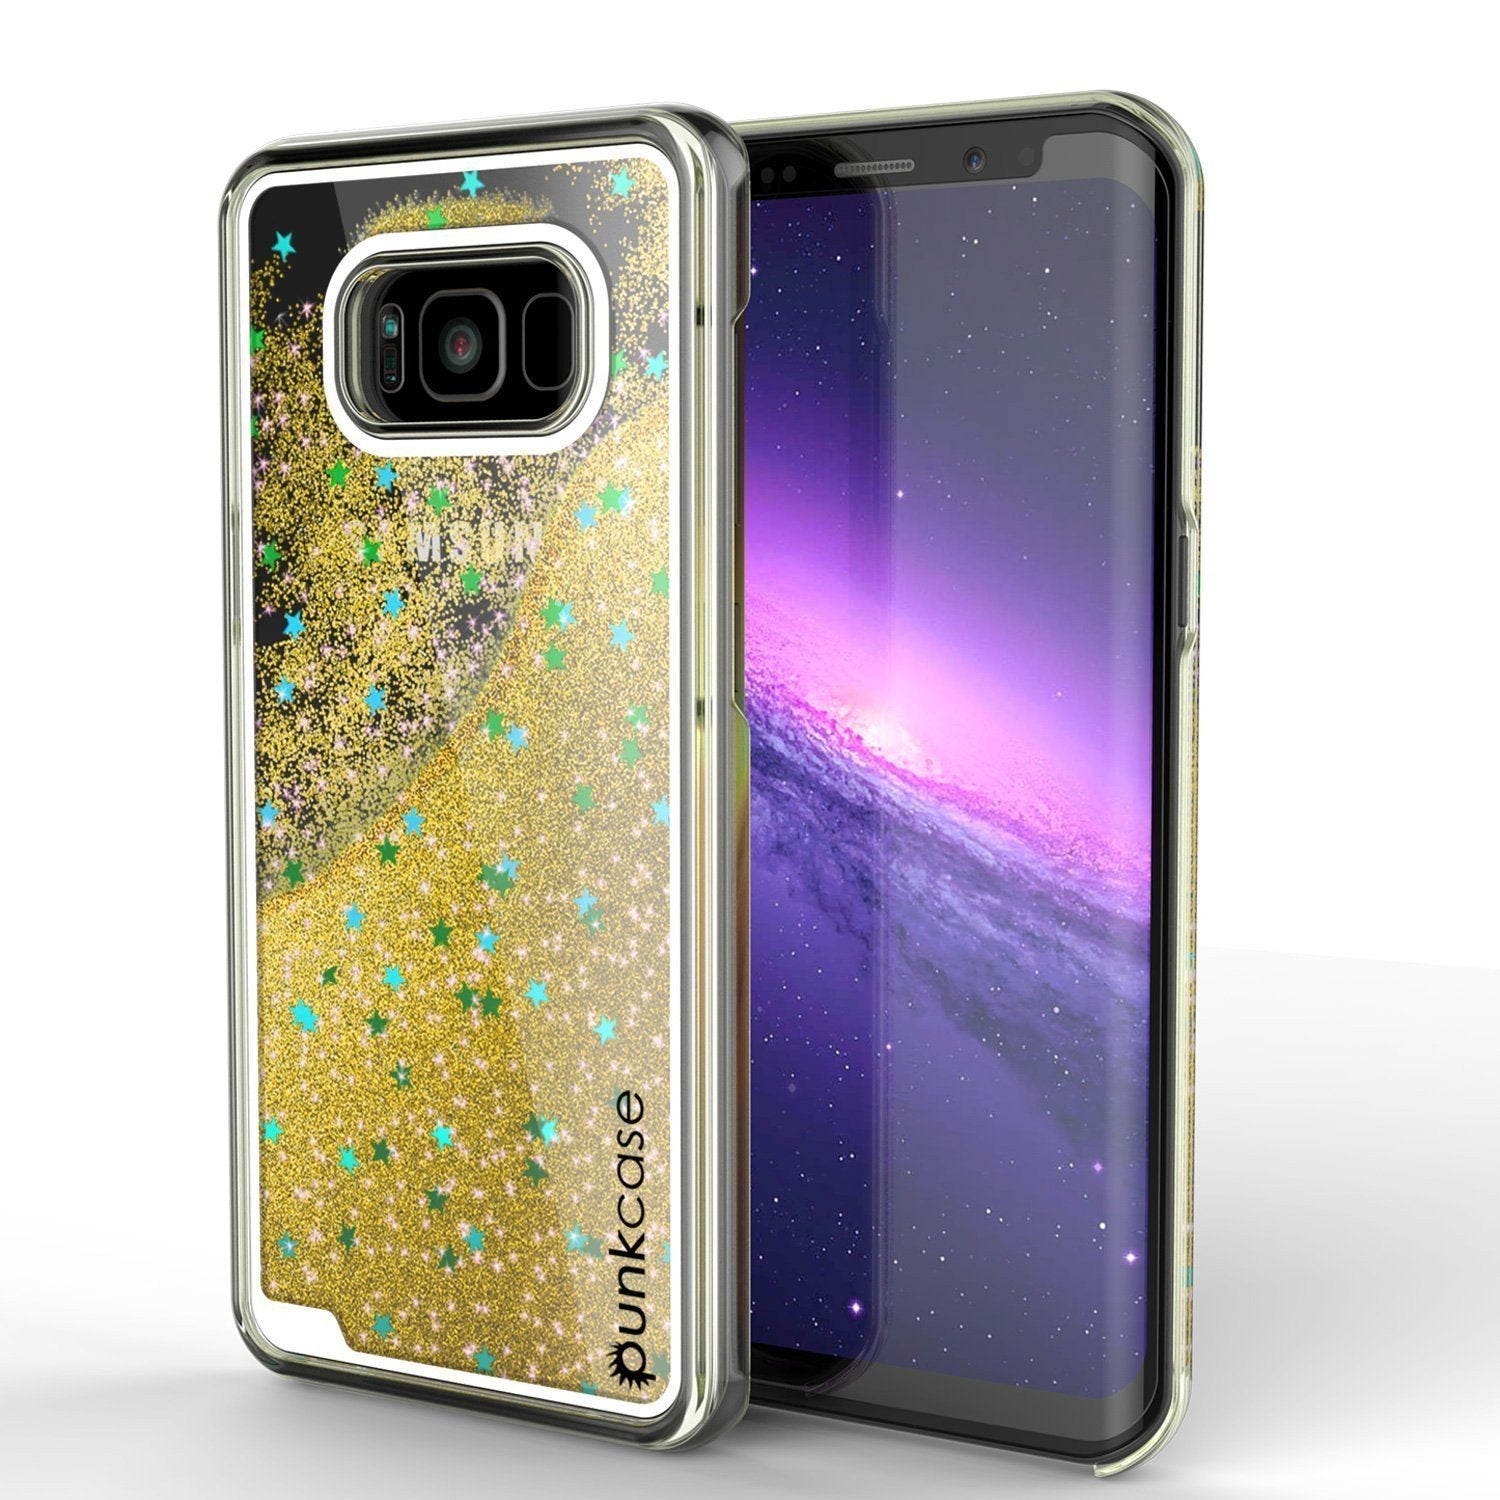 Galaxy S8 Case, Punkcase [Liquid Series] Protective Dual Layer Floating Glitter Cover with lots of Bling & Sparkle + PunkShield Screen Protector for Samsung S8 [Gold]